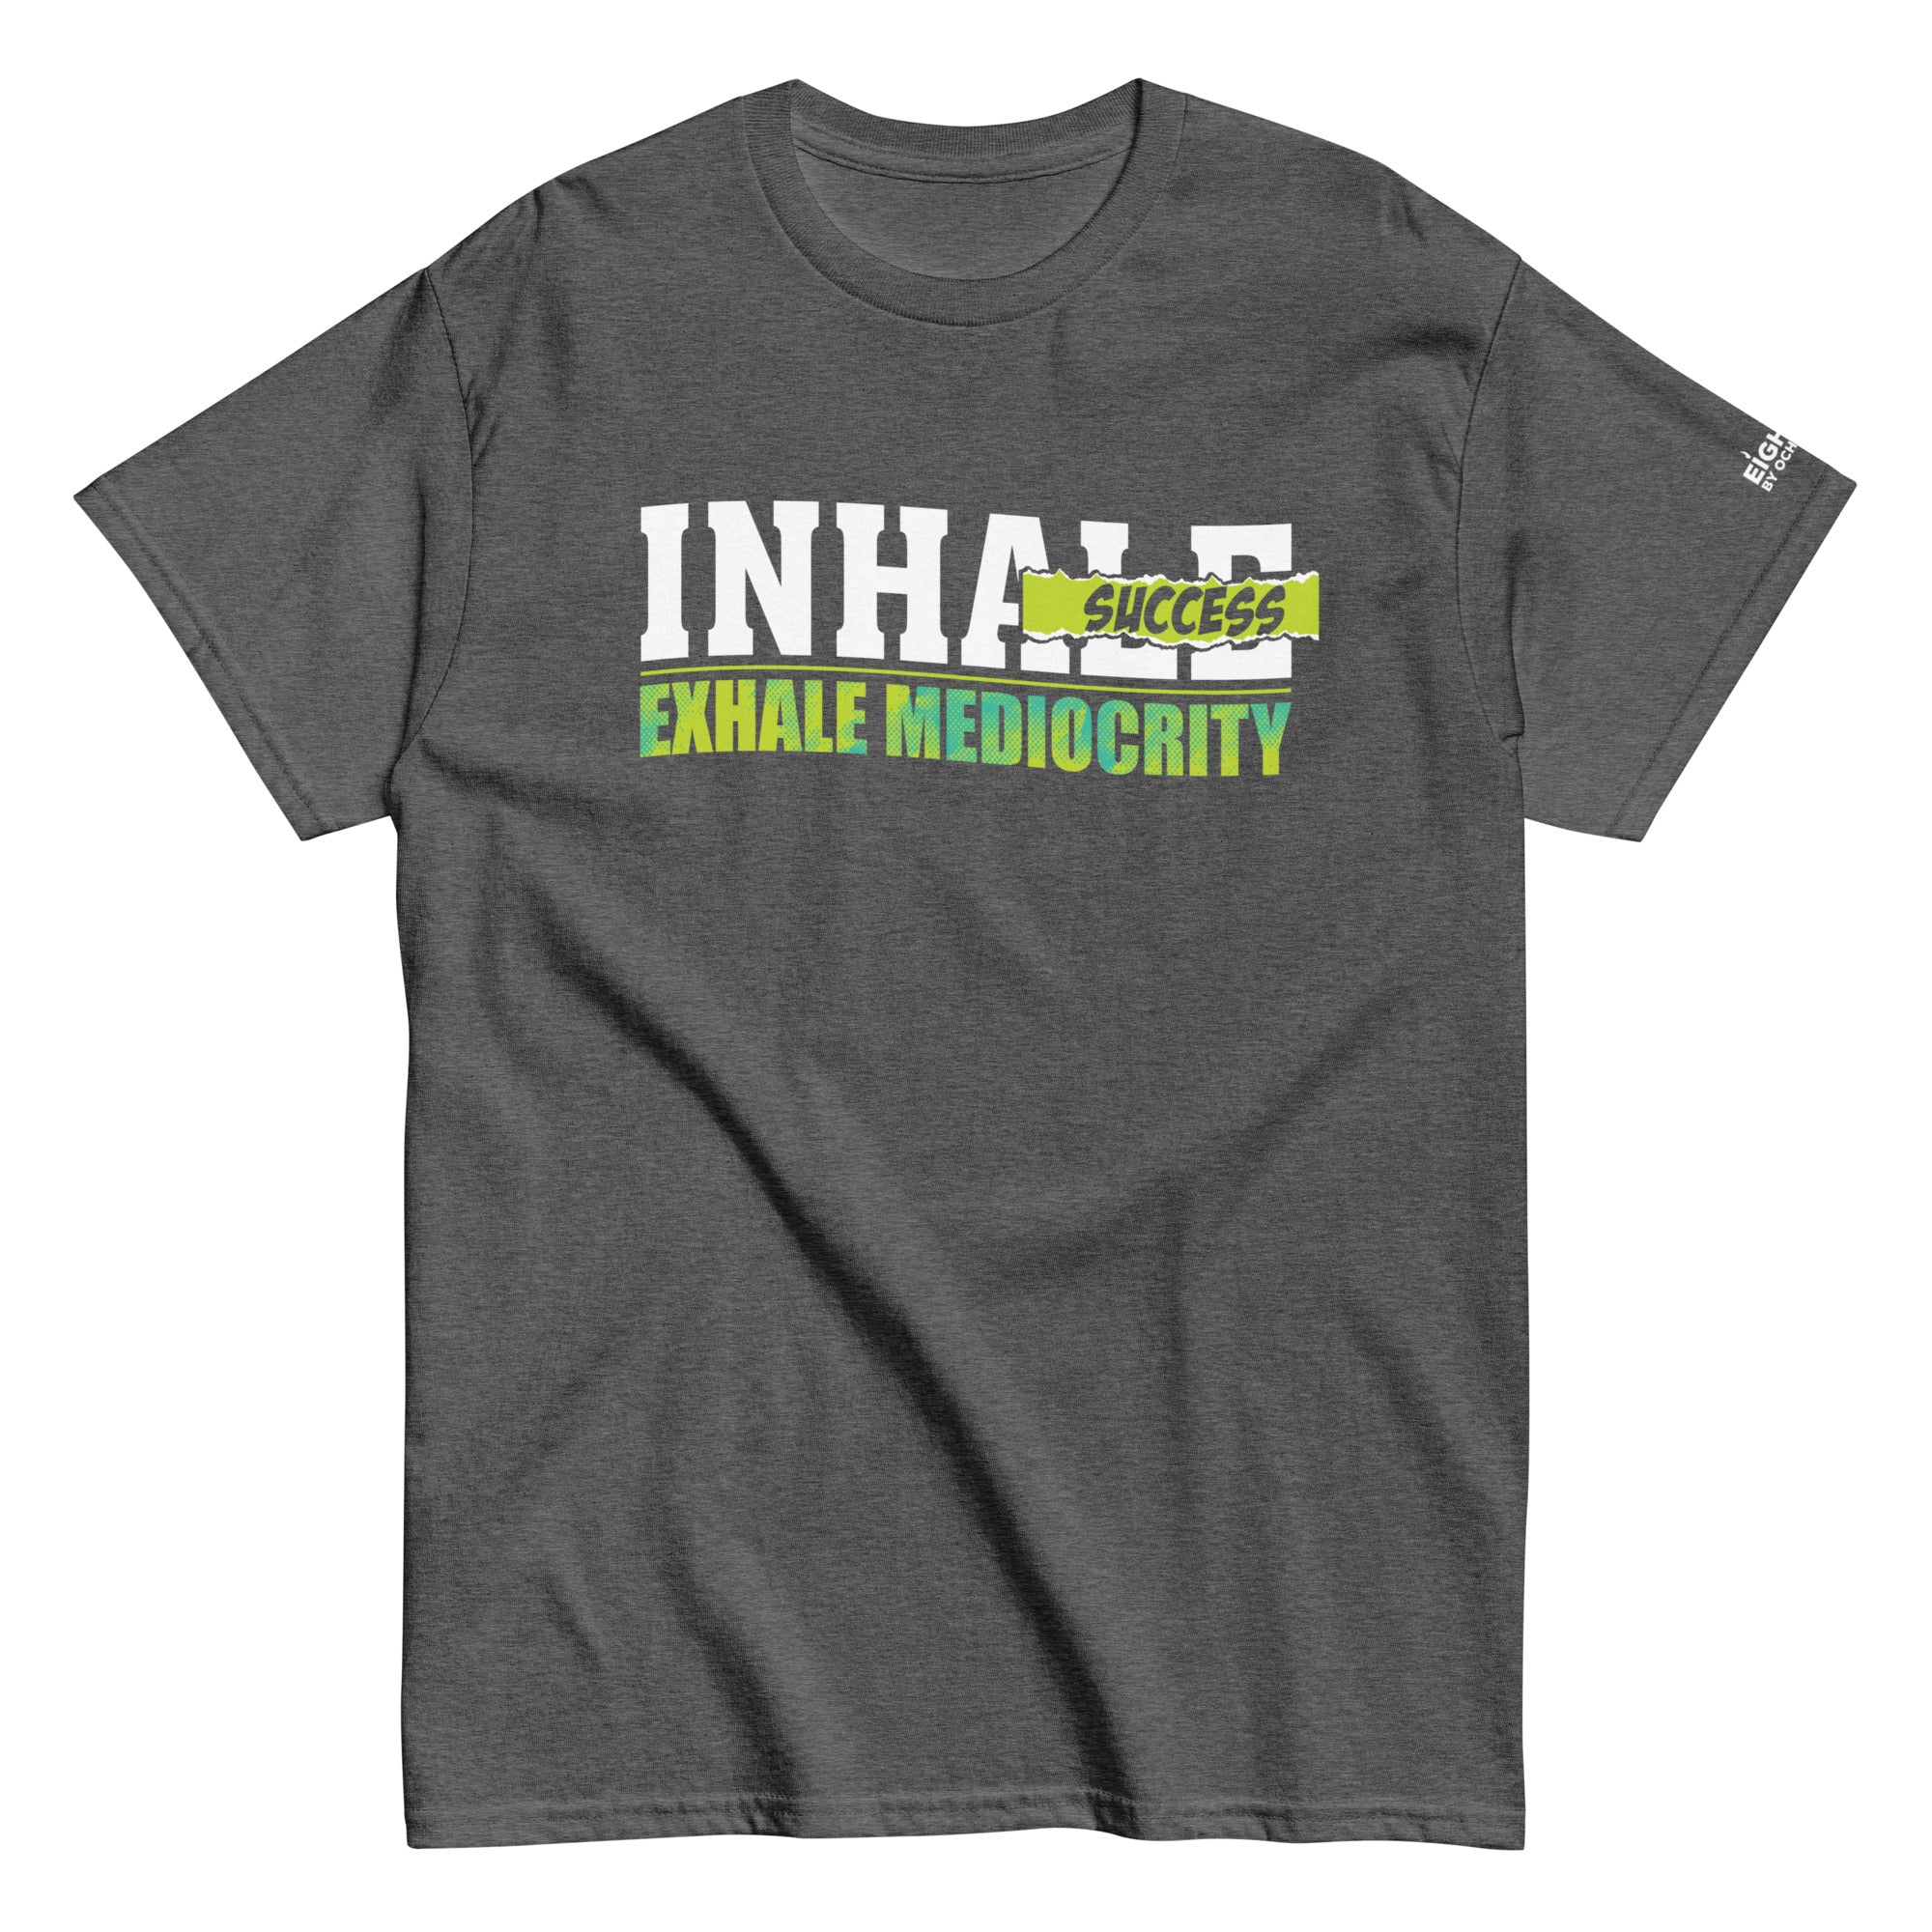 Eighty5 "Inhale Success, Exhale Mediocrity" T-Shirt